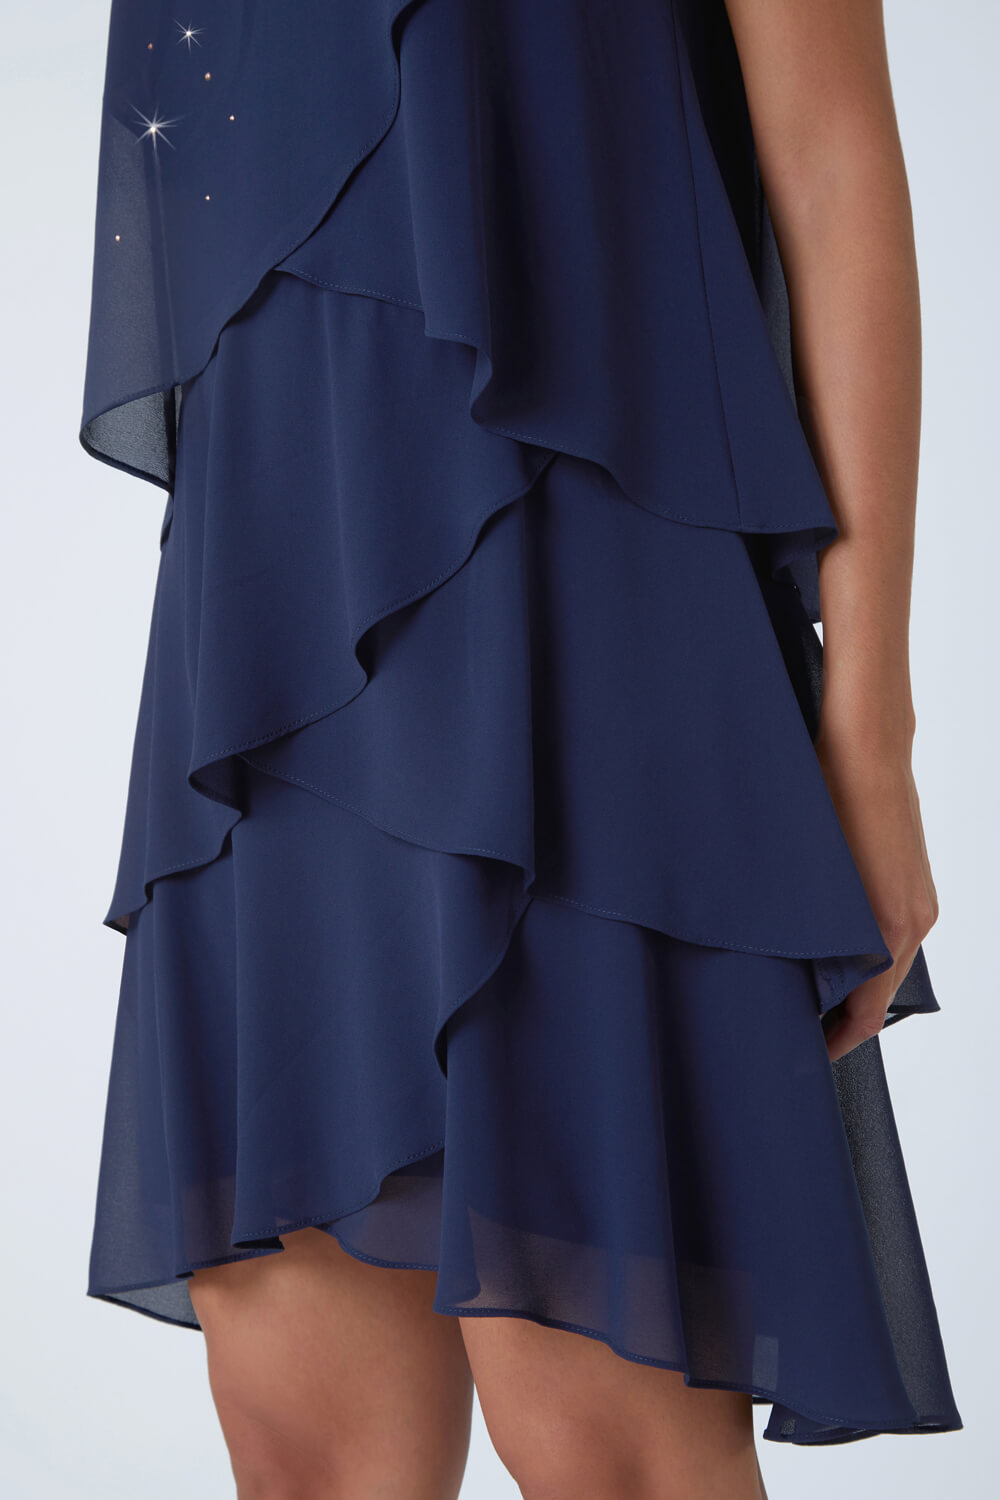 Midnight Blue Embellished Frill Swing Dress, Image 5 of 5